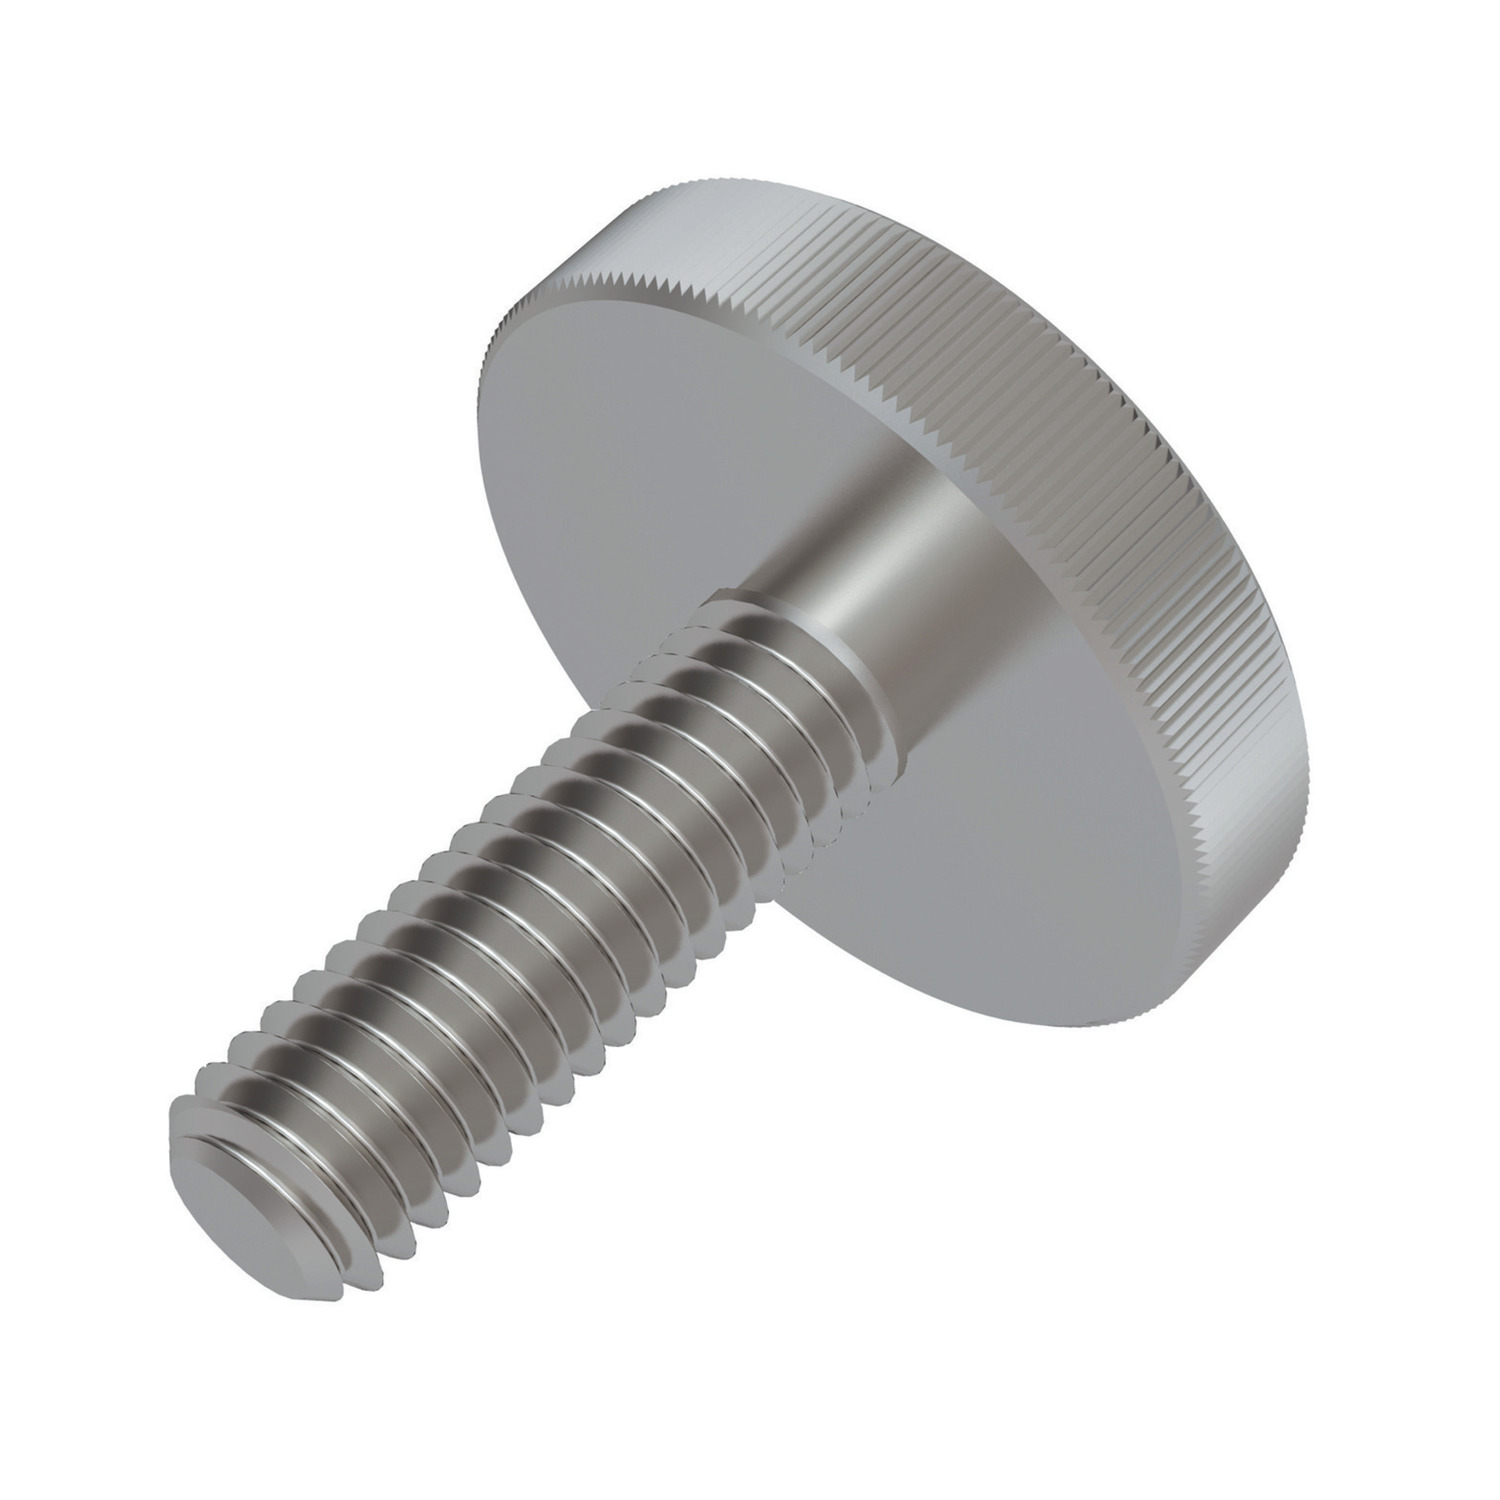 P0405.030-016-A4 Knurled Thumb Screw M3x16 A4 s/s 